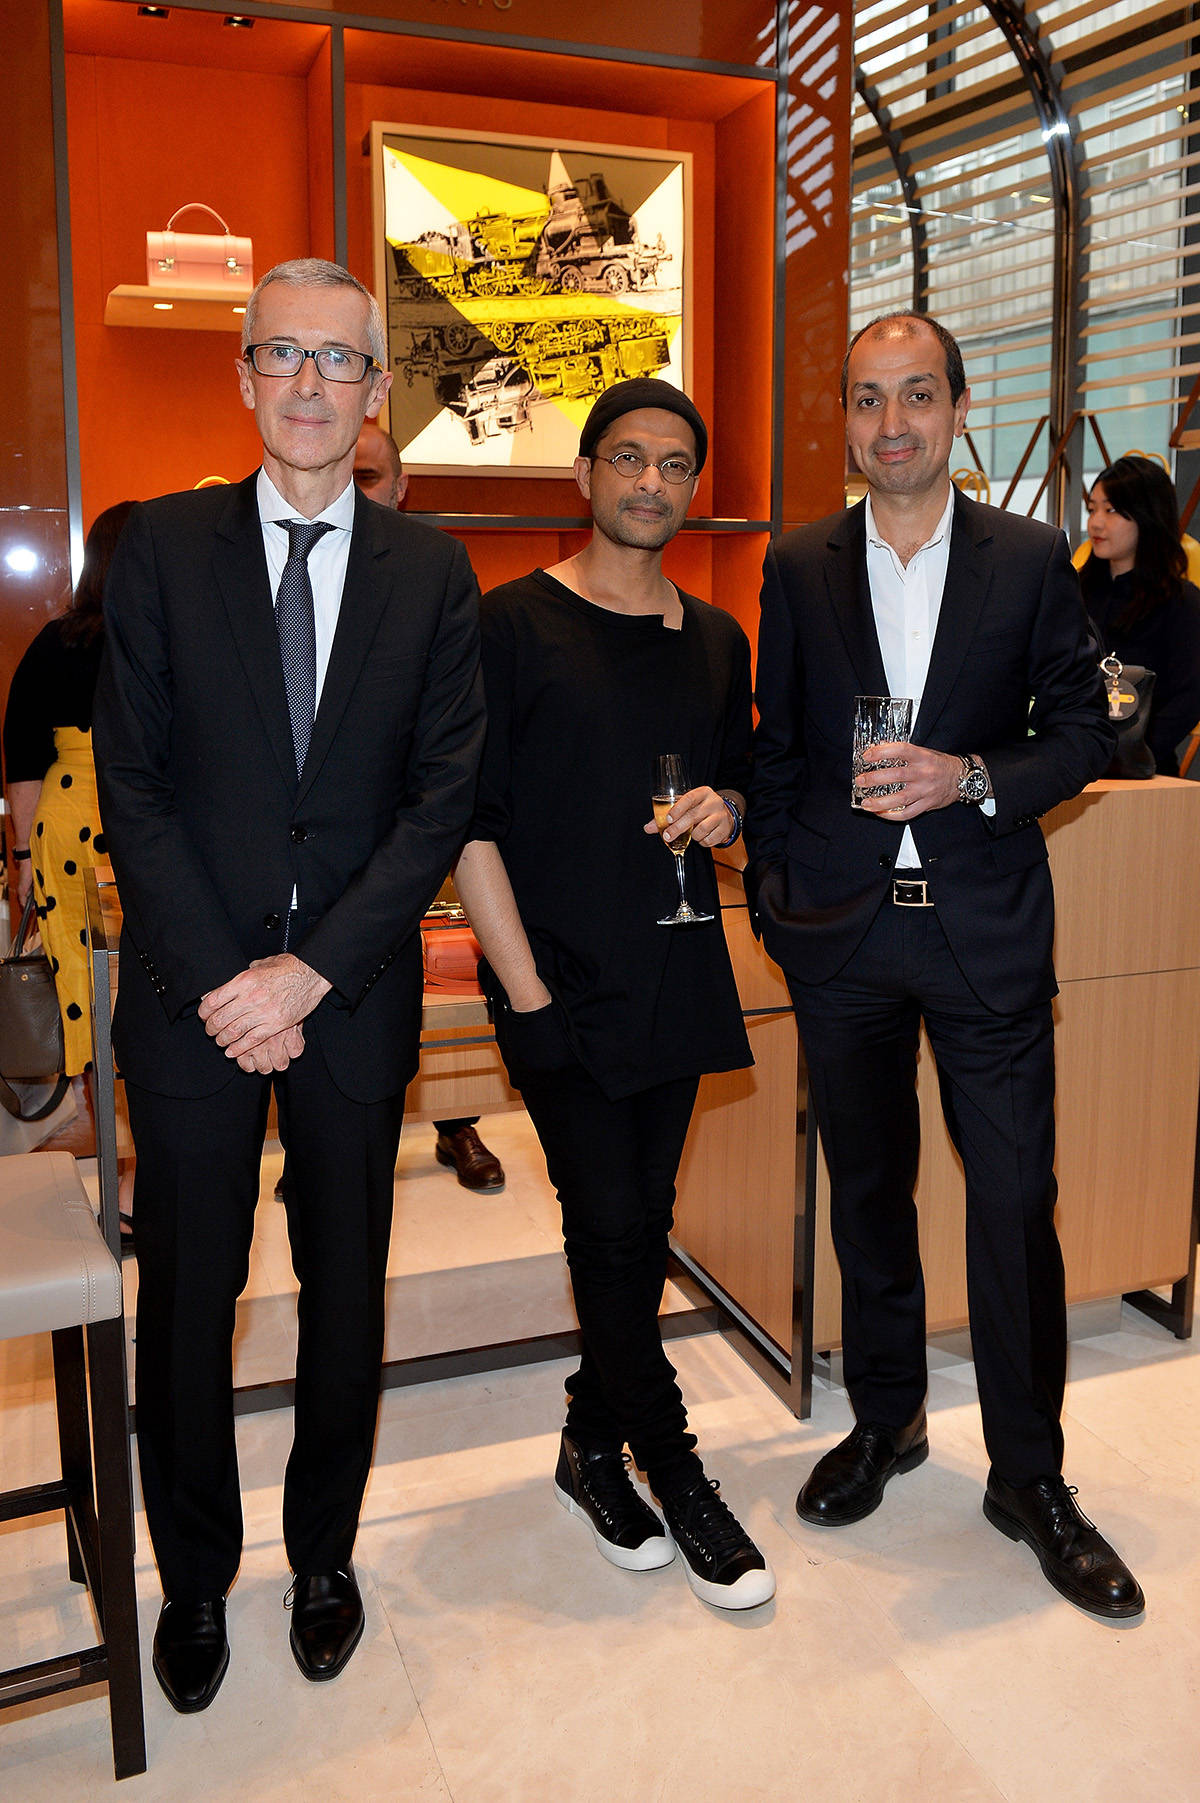 Celebrating the launch of Moynat’s new collection at Selfridges Wallpaper